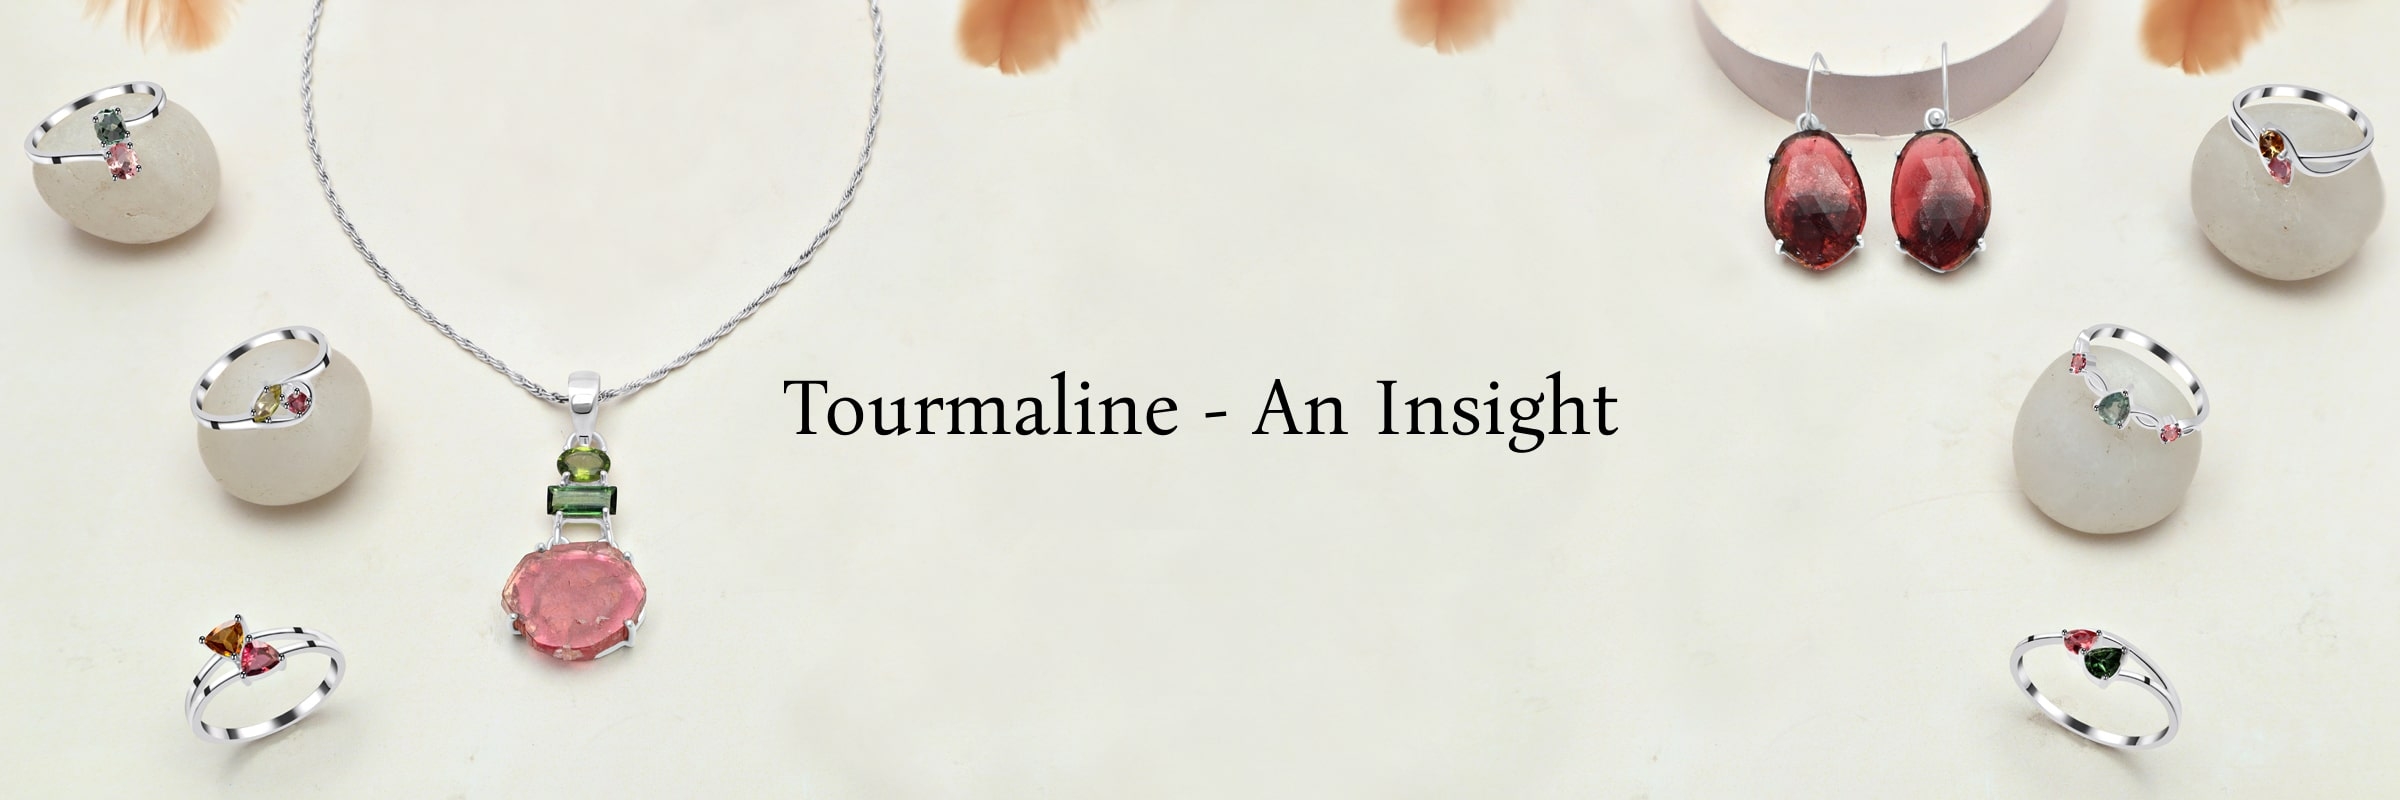 What is Tourmaline